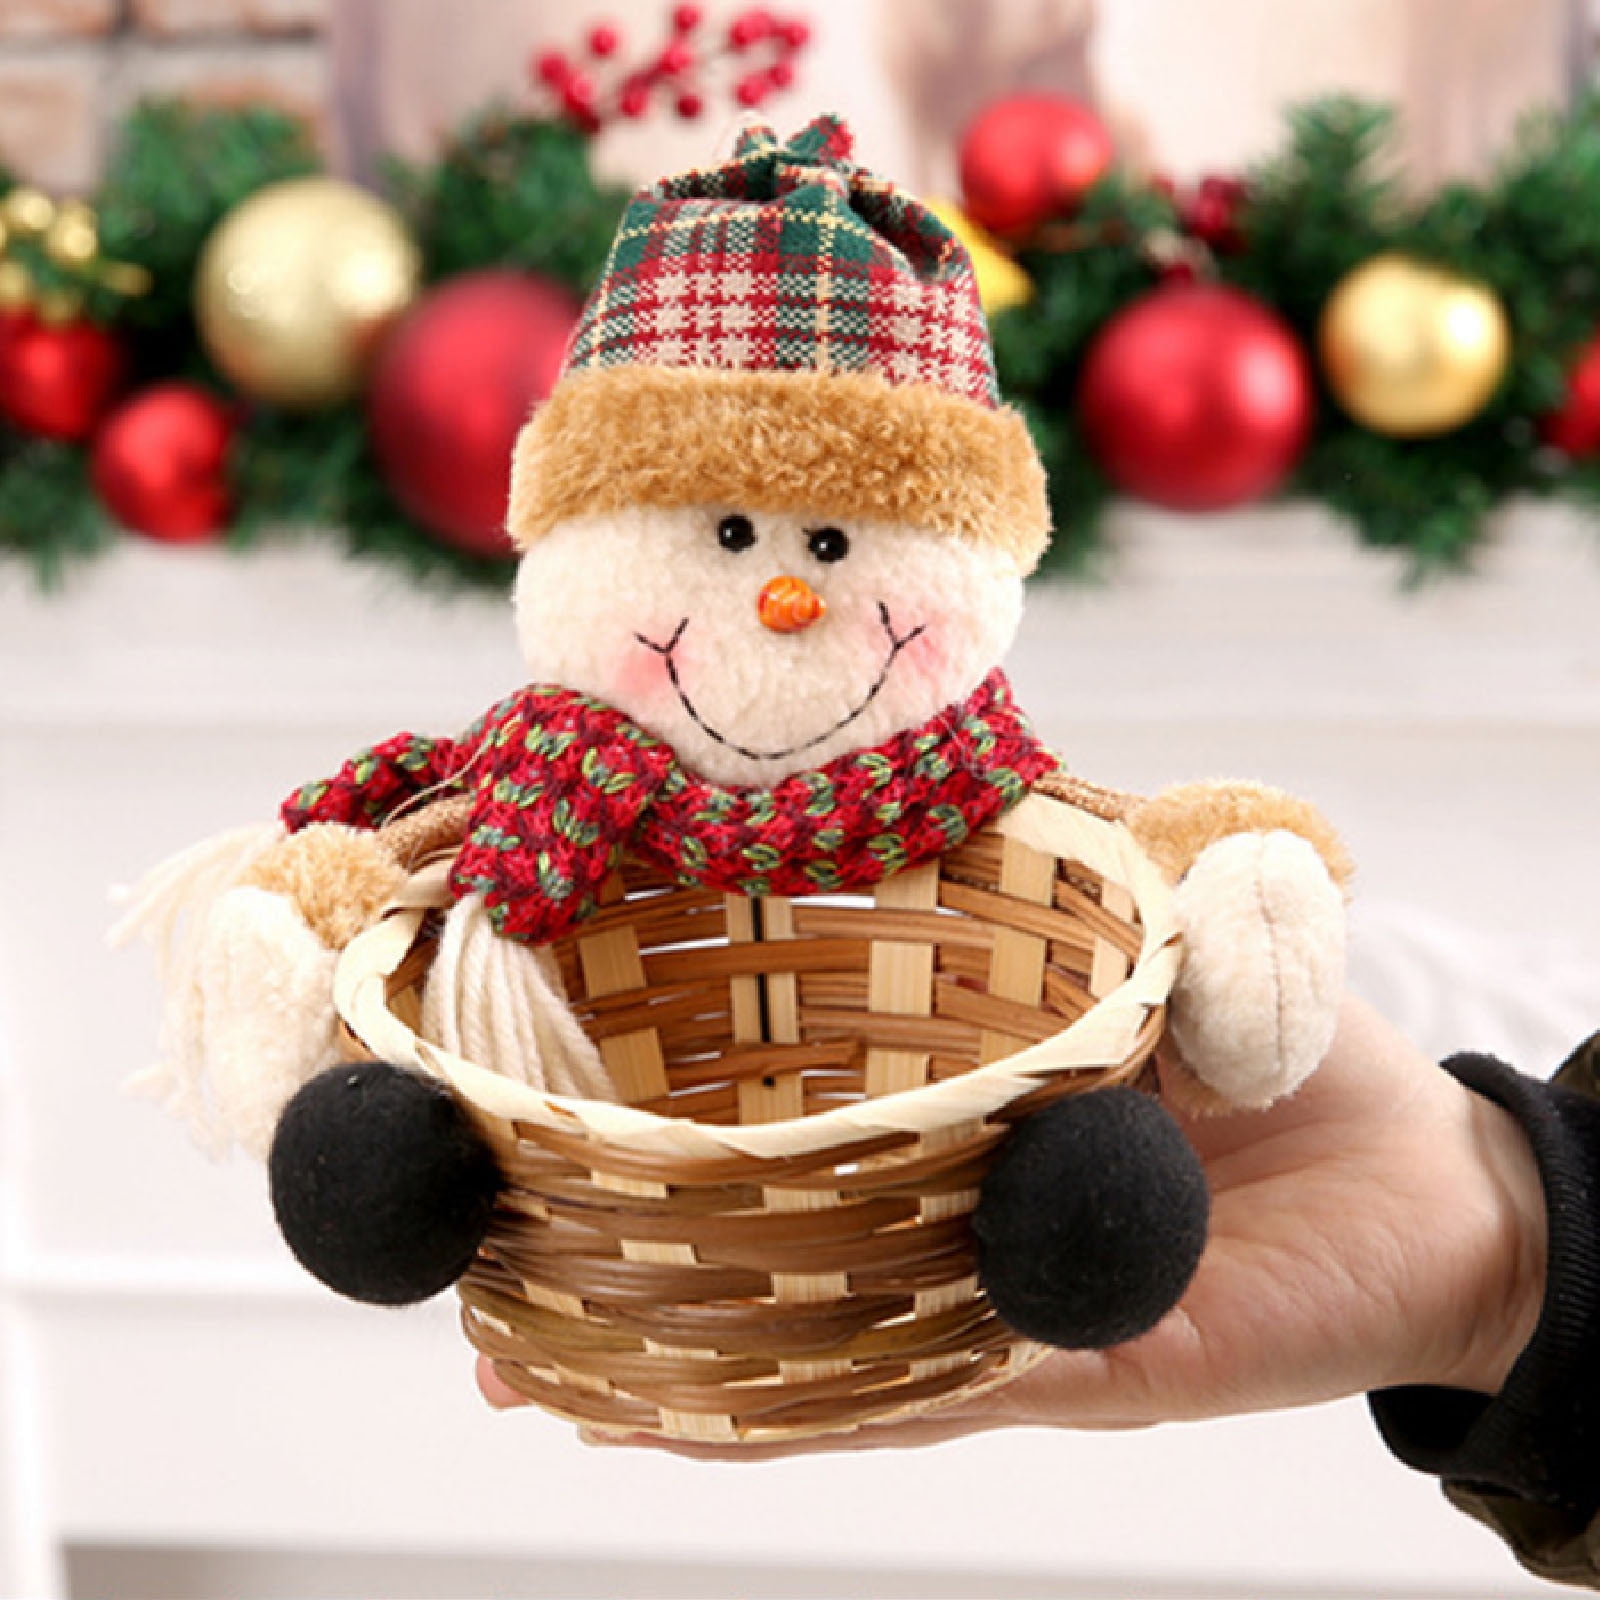 A Christmas Candy Storage Basket Bamboo Candy Dishes Holders Desktop Ornament Decoration Party Supplies Santa Claus Snowman Reindeer Gift for Kids 